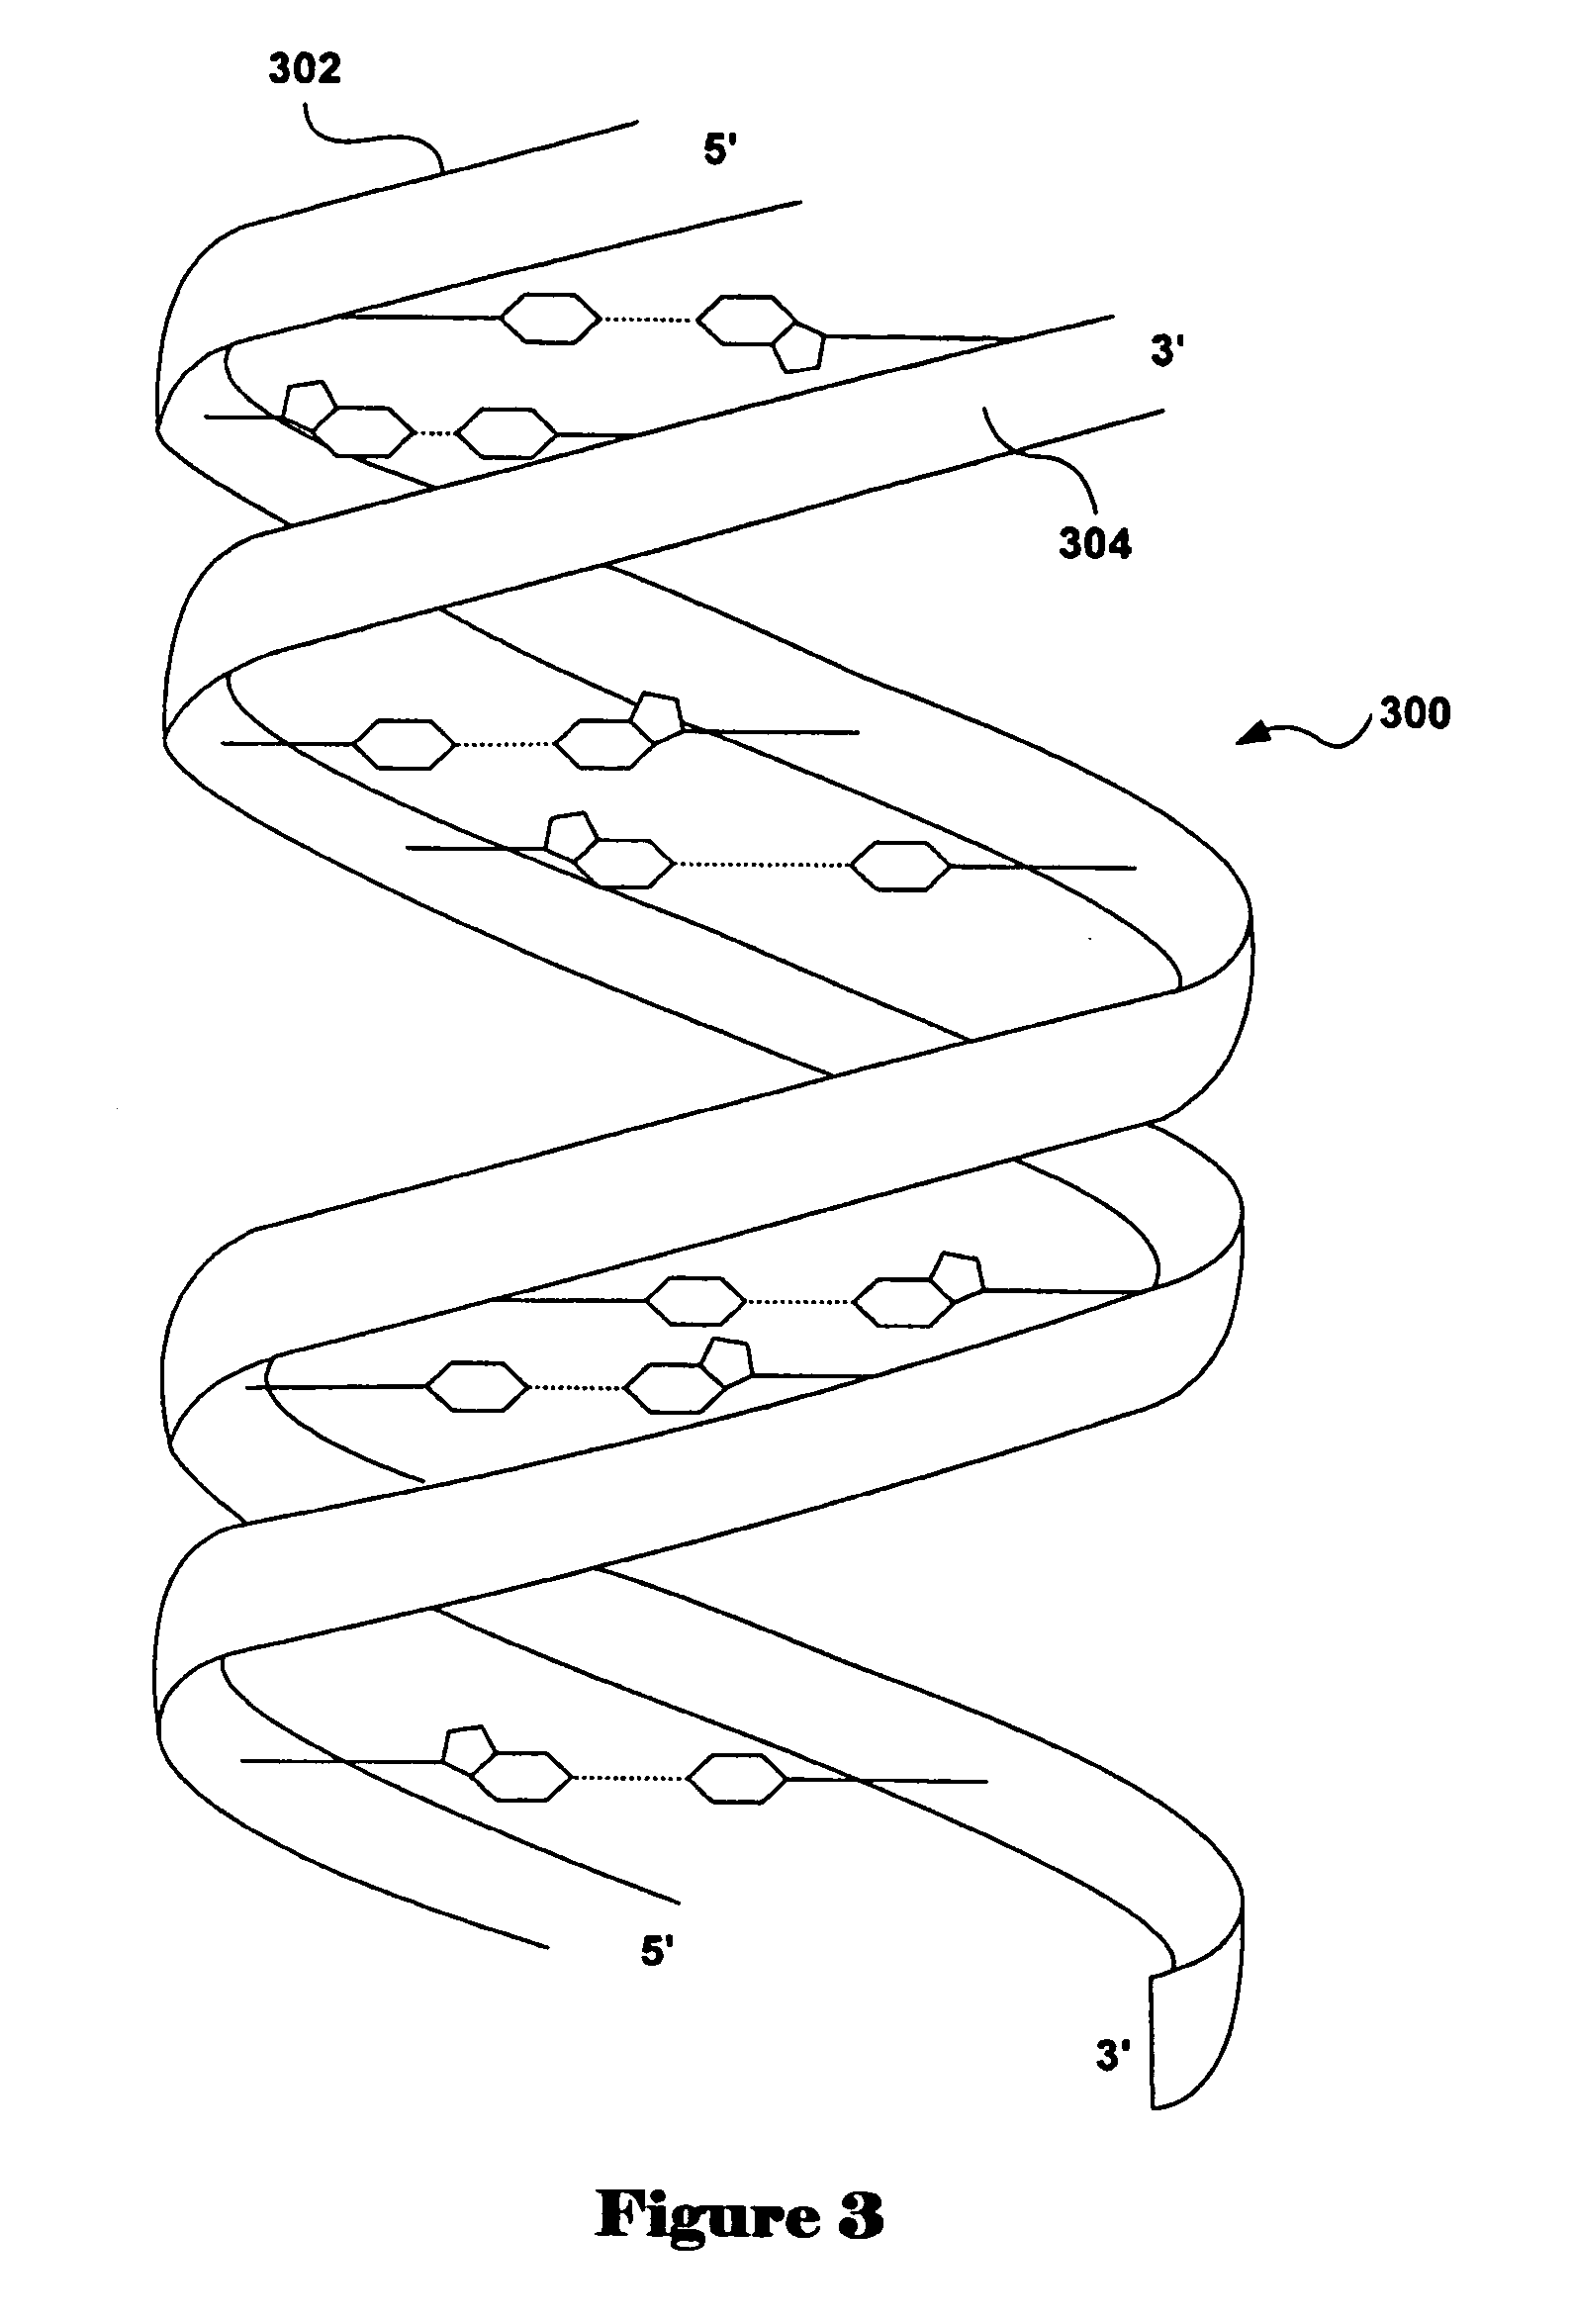 Method and system for testing feature-extractability of high-density microarrays using an embedded pattern block